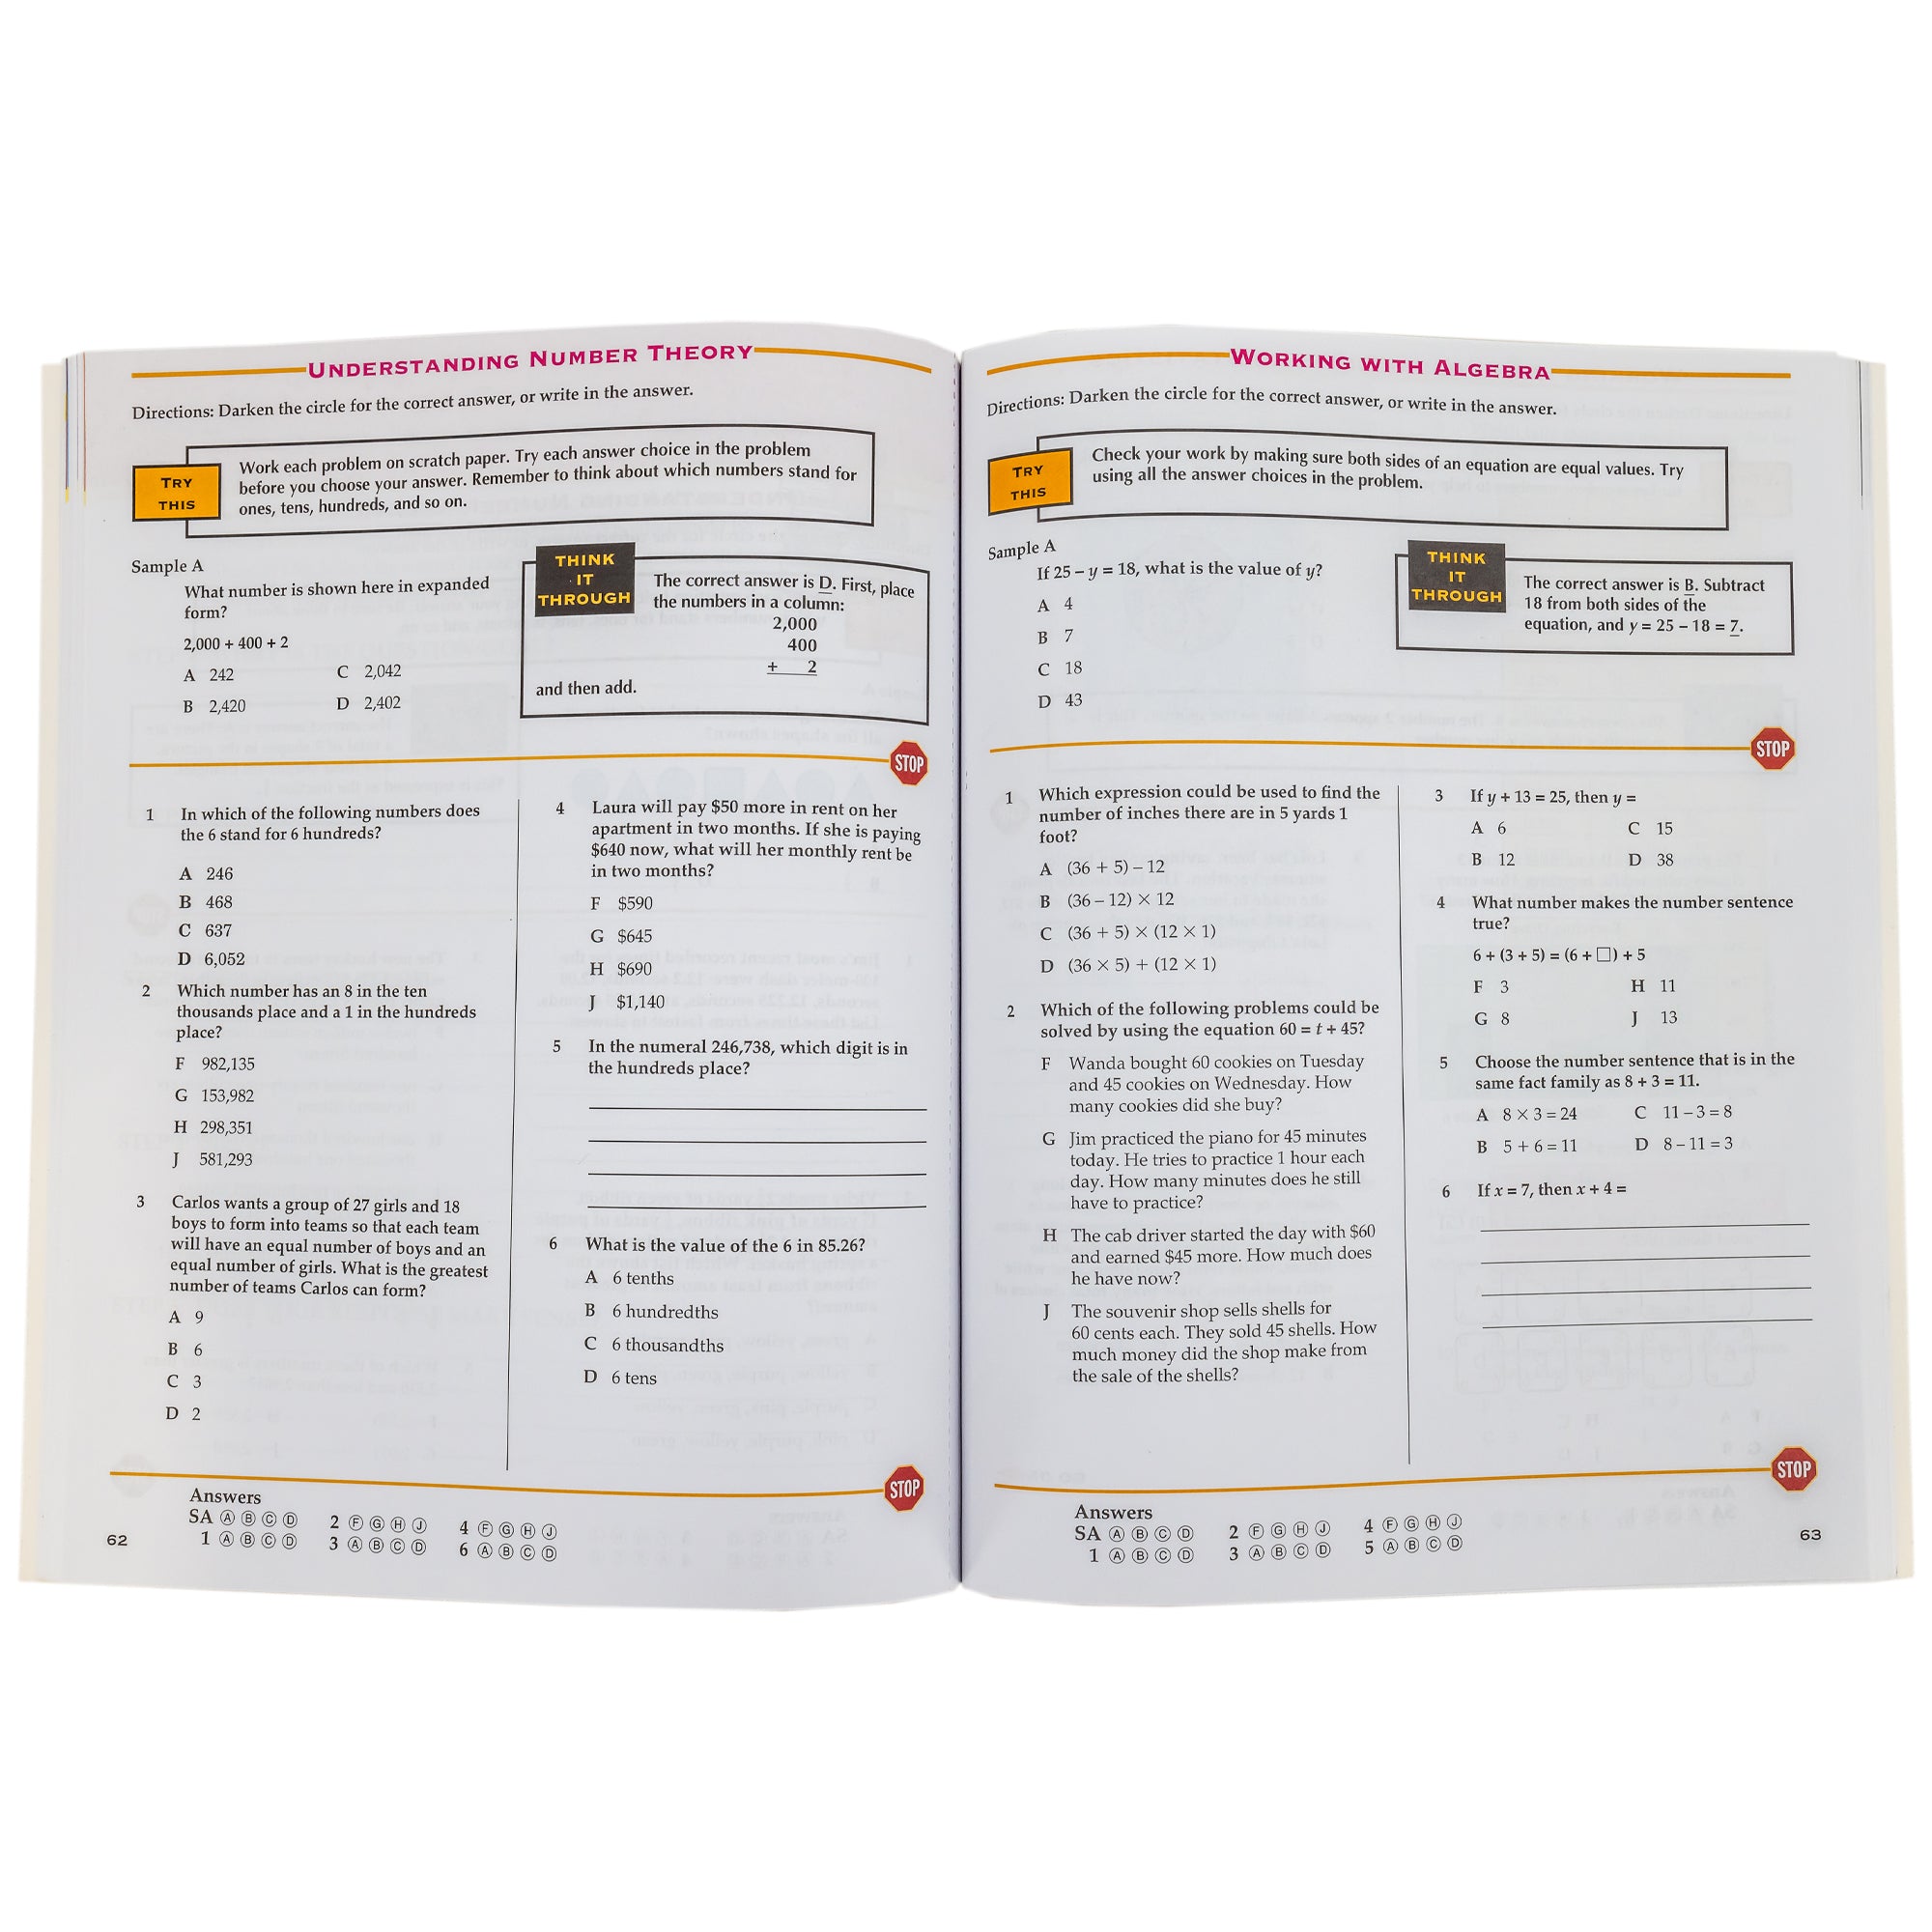 Test Prep Grade 5 book open to show inside pages. The left page has a sample question at the top, 5 multiple choice questions, and 1 sentence question. The right page also has a sample question at the top, 5 multiple choice questions, and 1 sentence question.